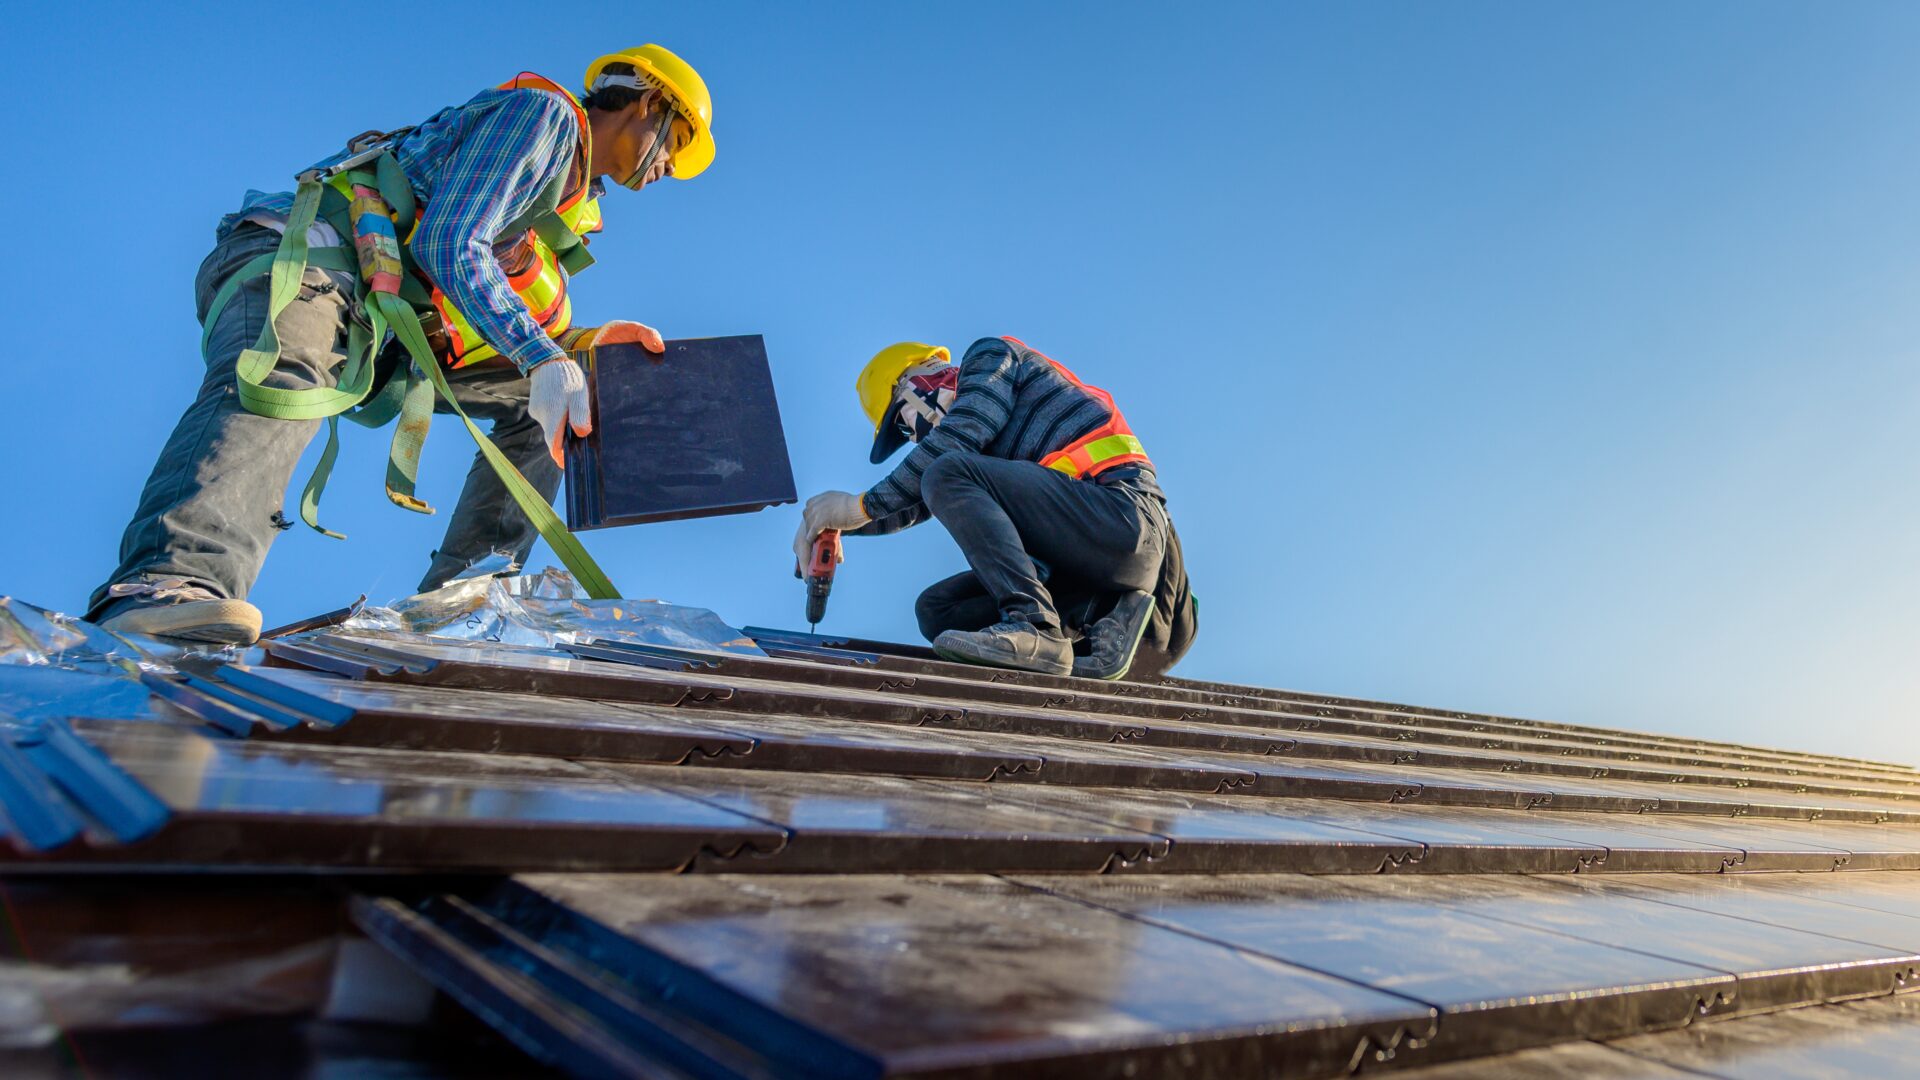 Two roofers in safety gear repair a tile roof